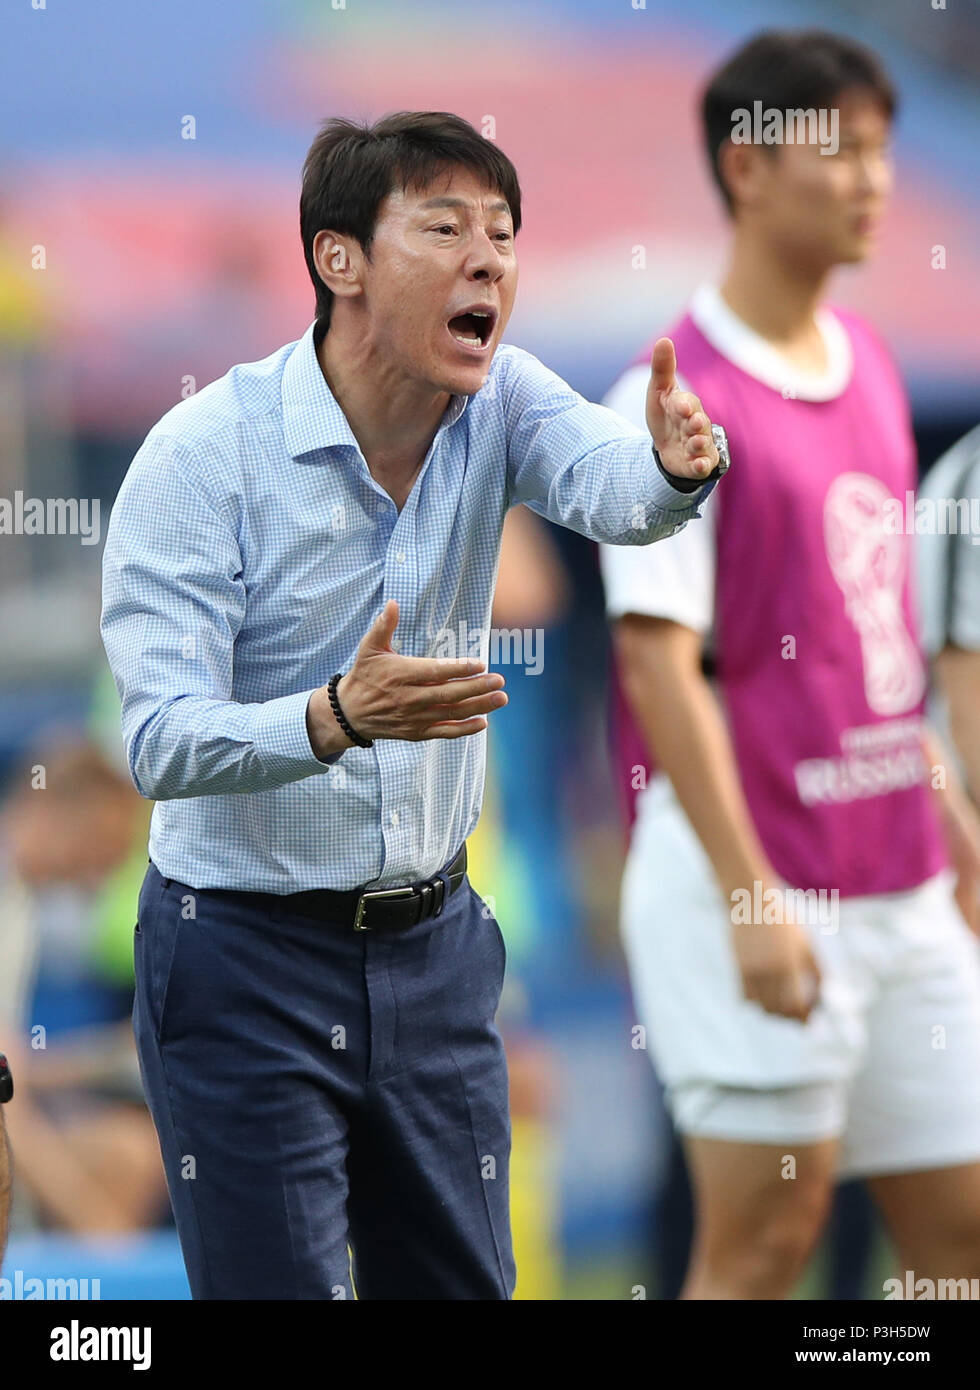 Nizhny Novgorod, Russia. 18th June, 2018. Head coach Shin Tae-yong of South Korea reacts during a group F match between Sweden and South Korea at the 2018 FIFA World Cup in Nizhny Novgorod, Russia, June 18, 2018. Sweden won 1-0. Credit: Wu Zhuang/Xinhua/Alamy Live News Stock Photo